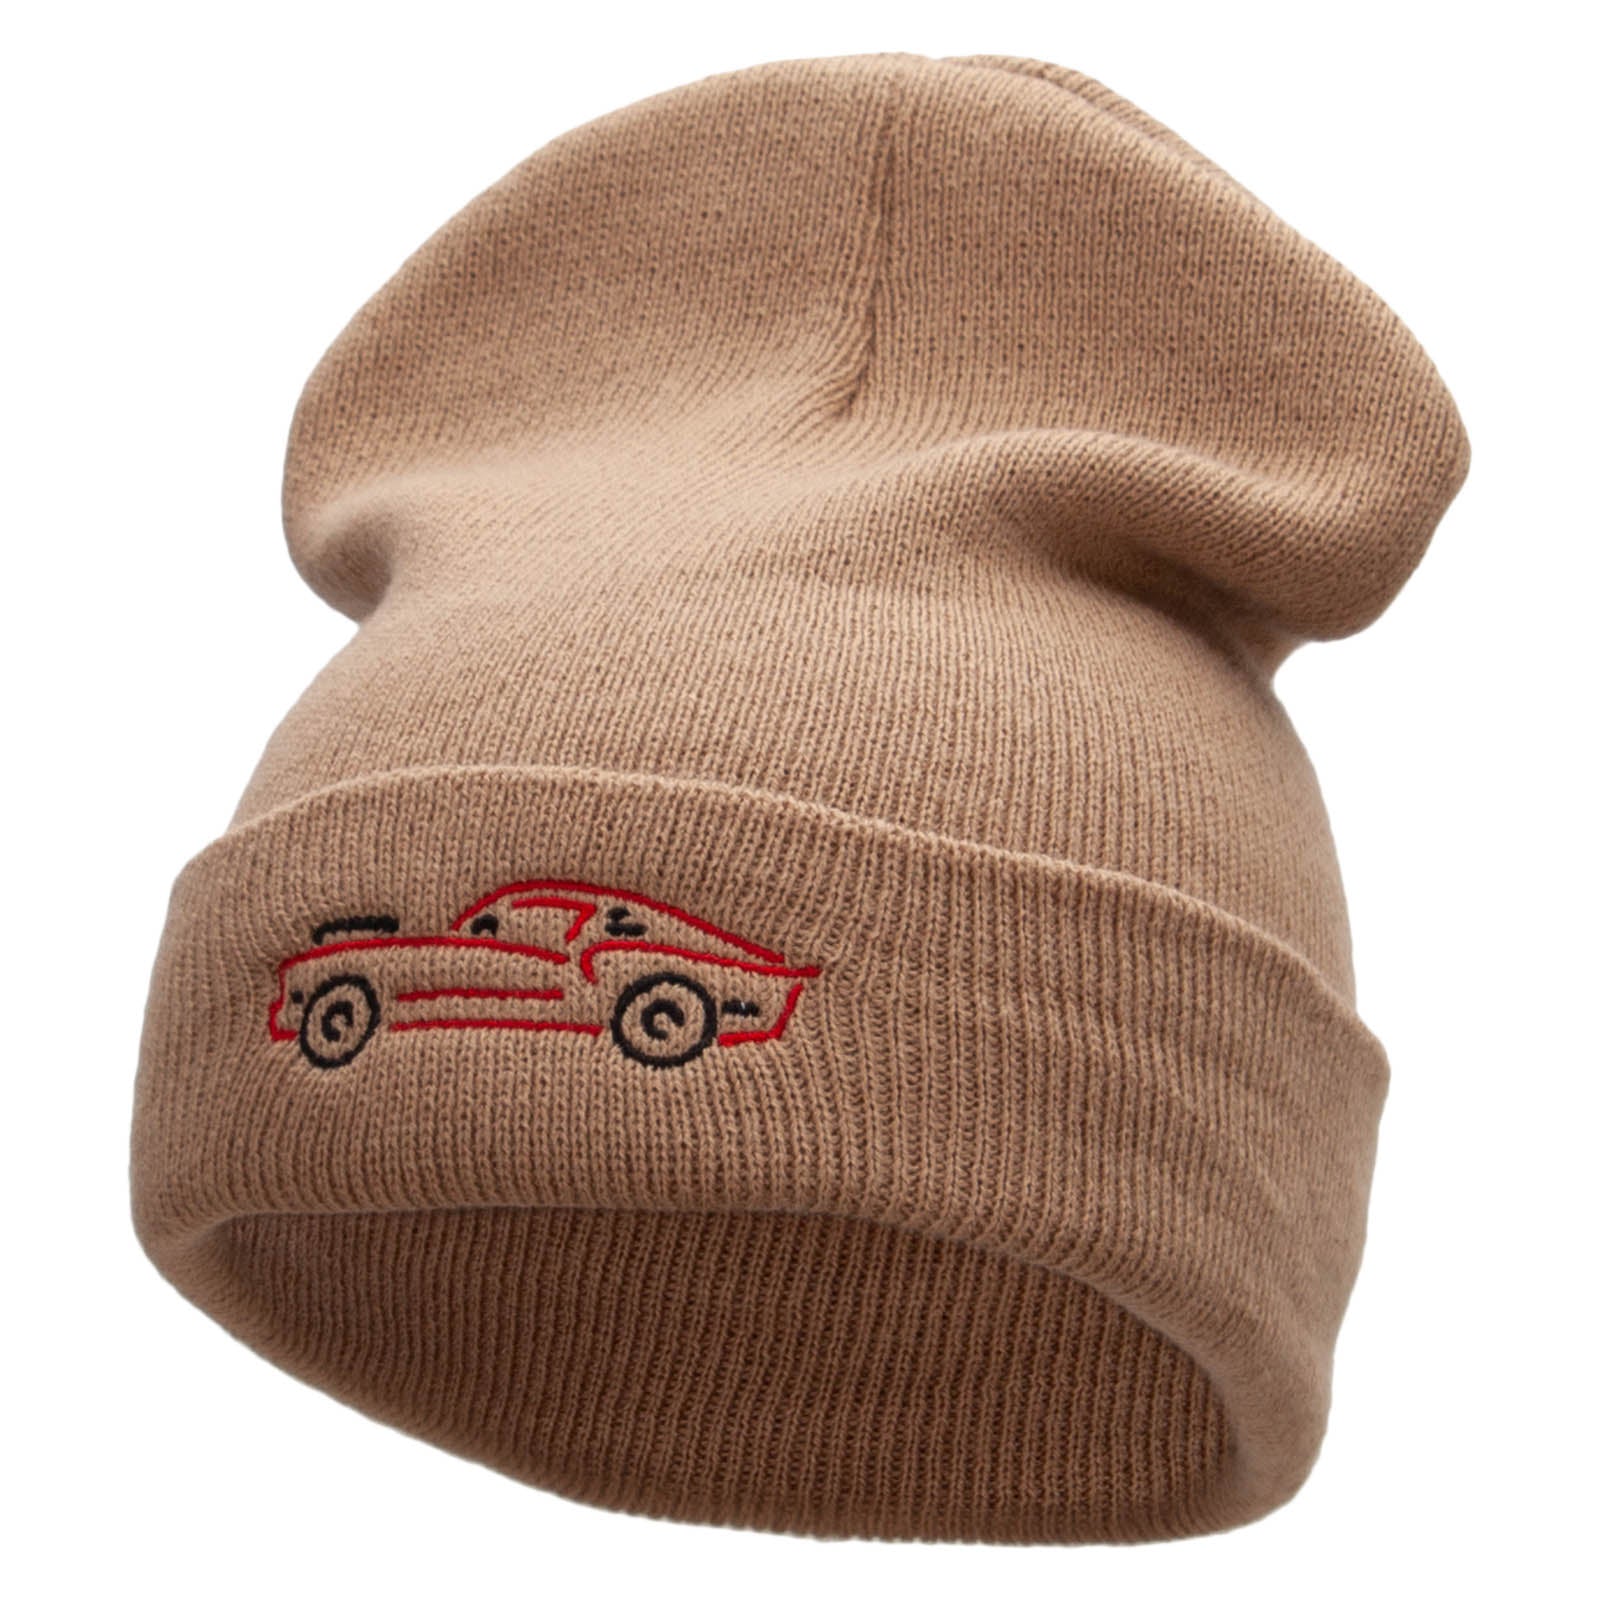 American Muscle Embroidered 12 Inch Solid Long Beanie Made in USA - Khaki OSFM